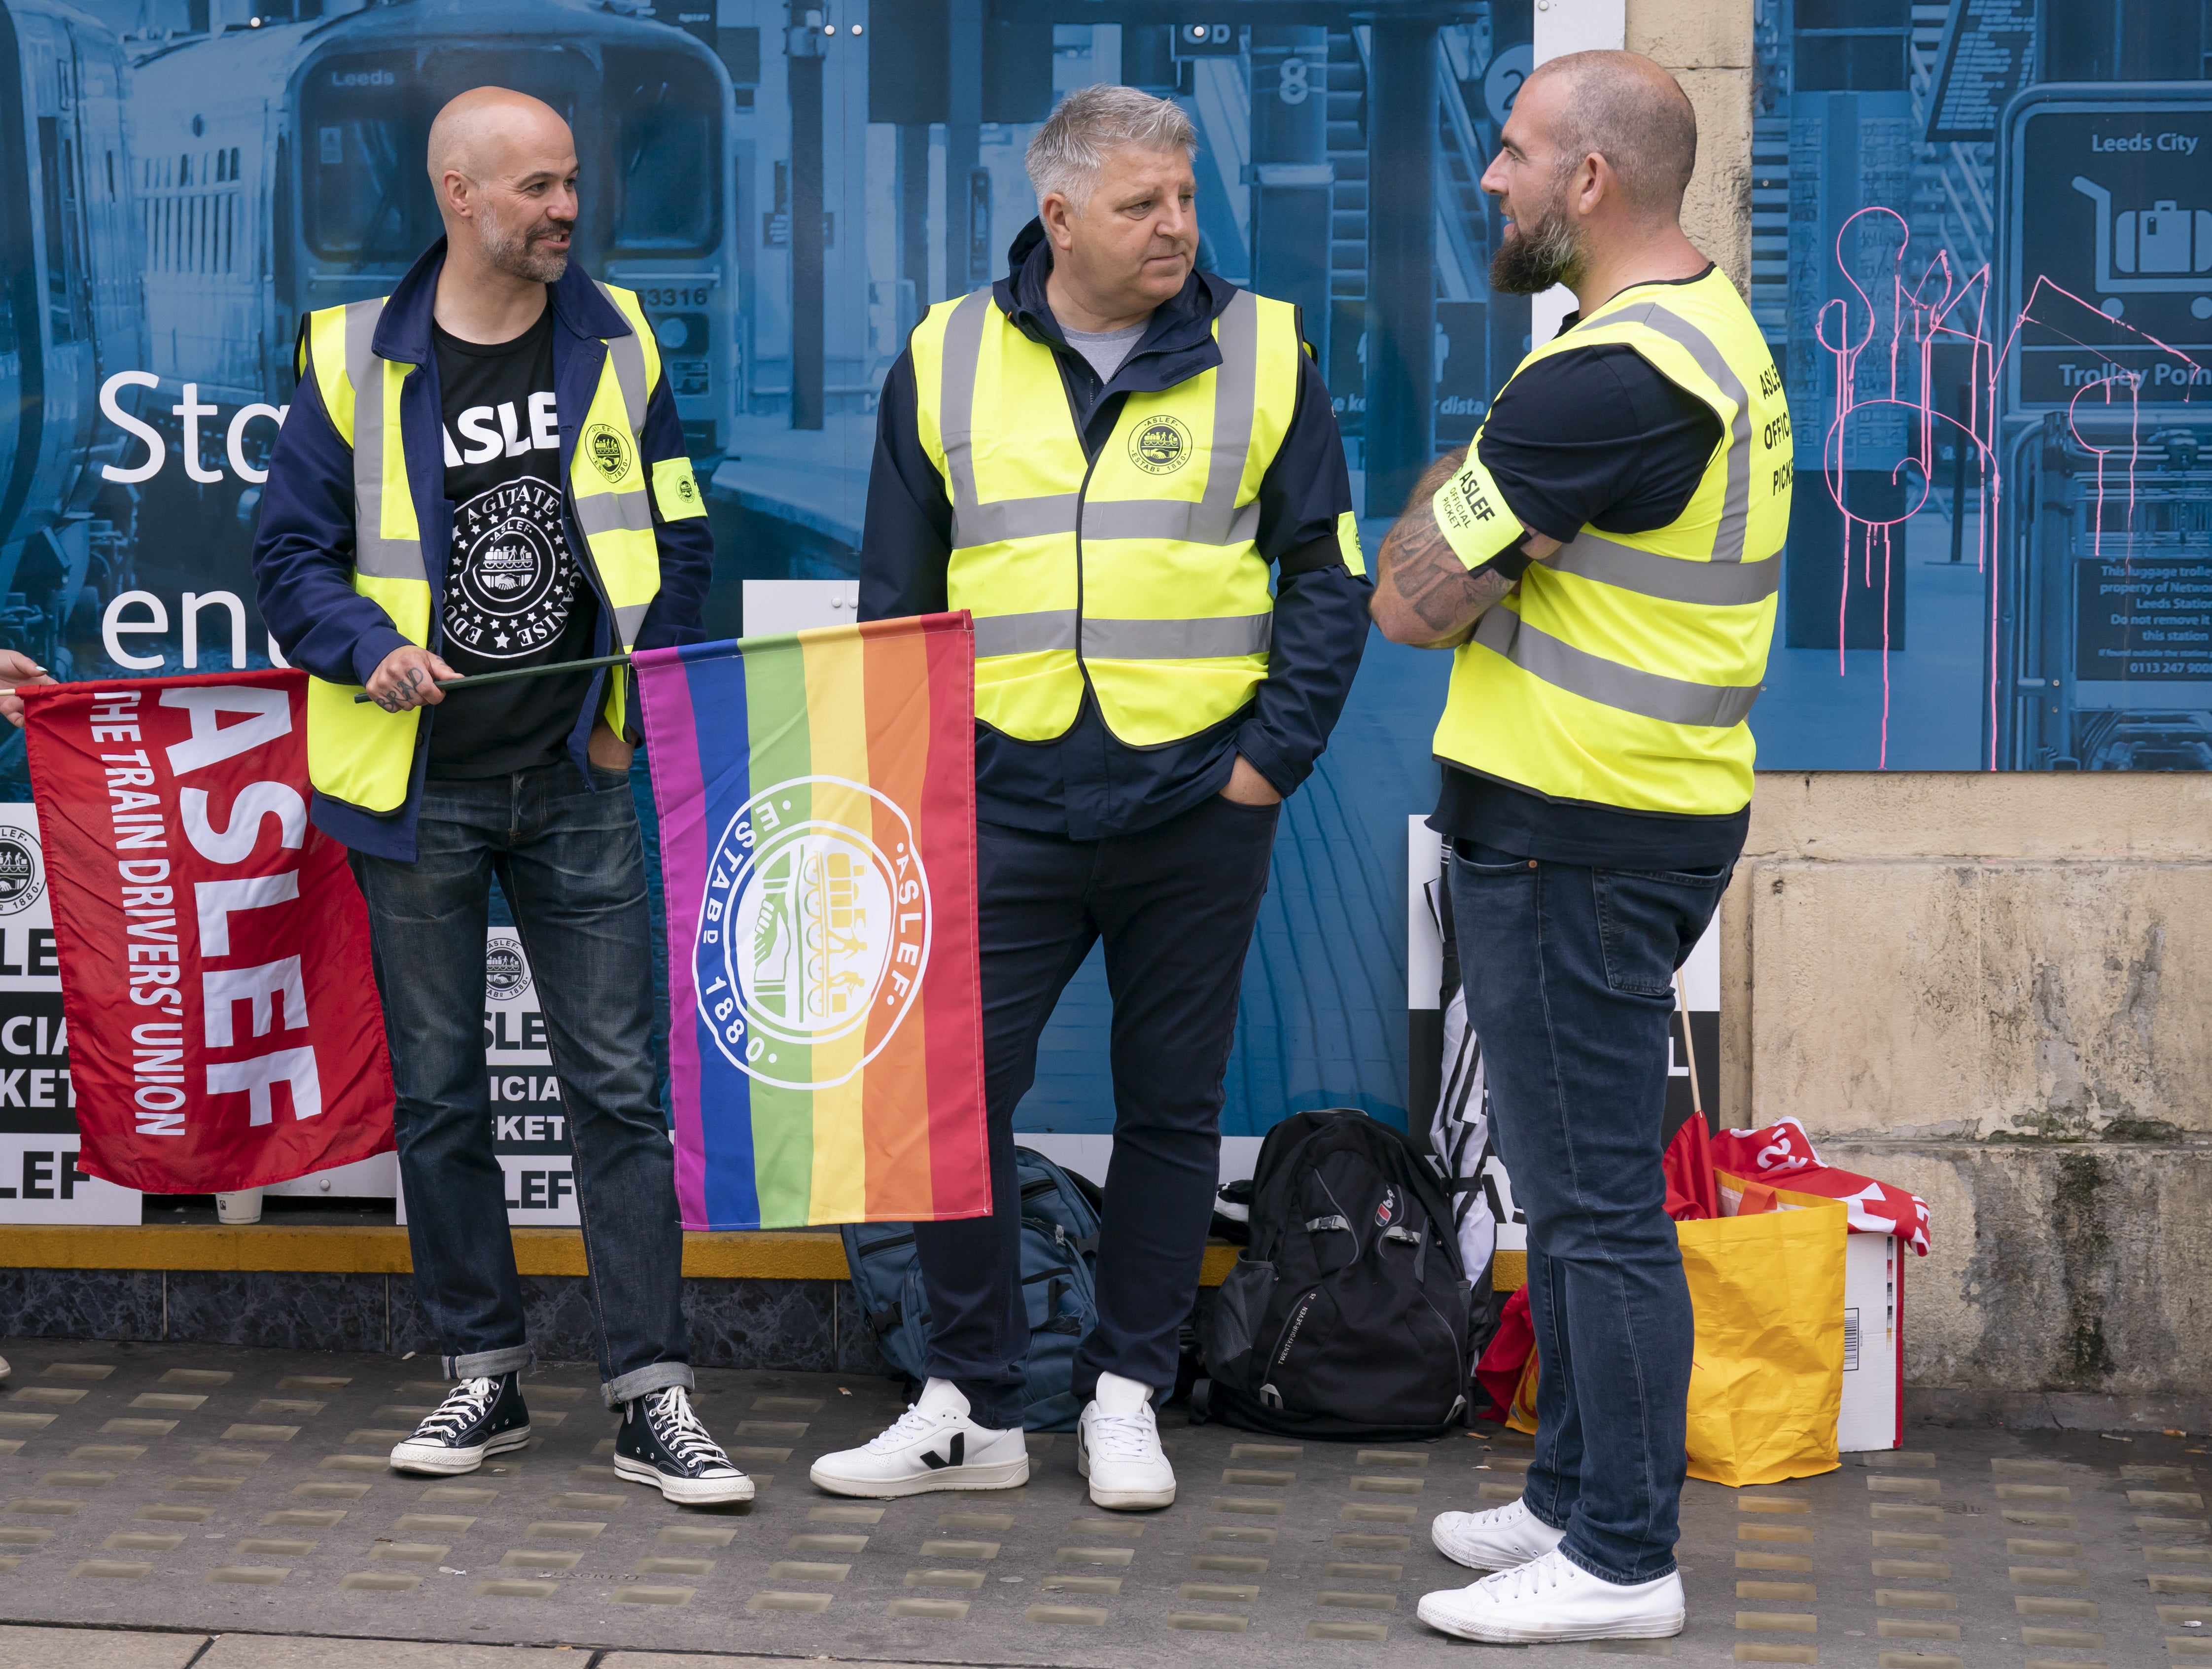 Protesters on the picket line outside Leeds train station